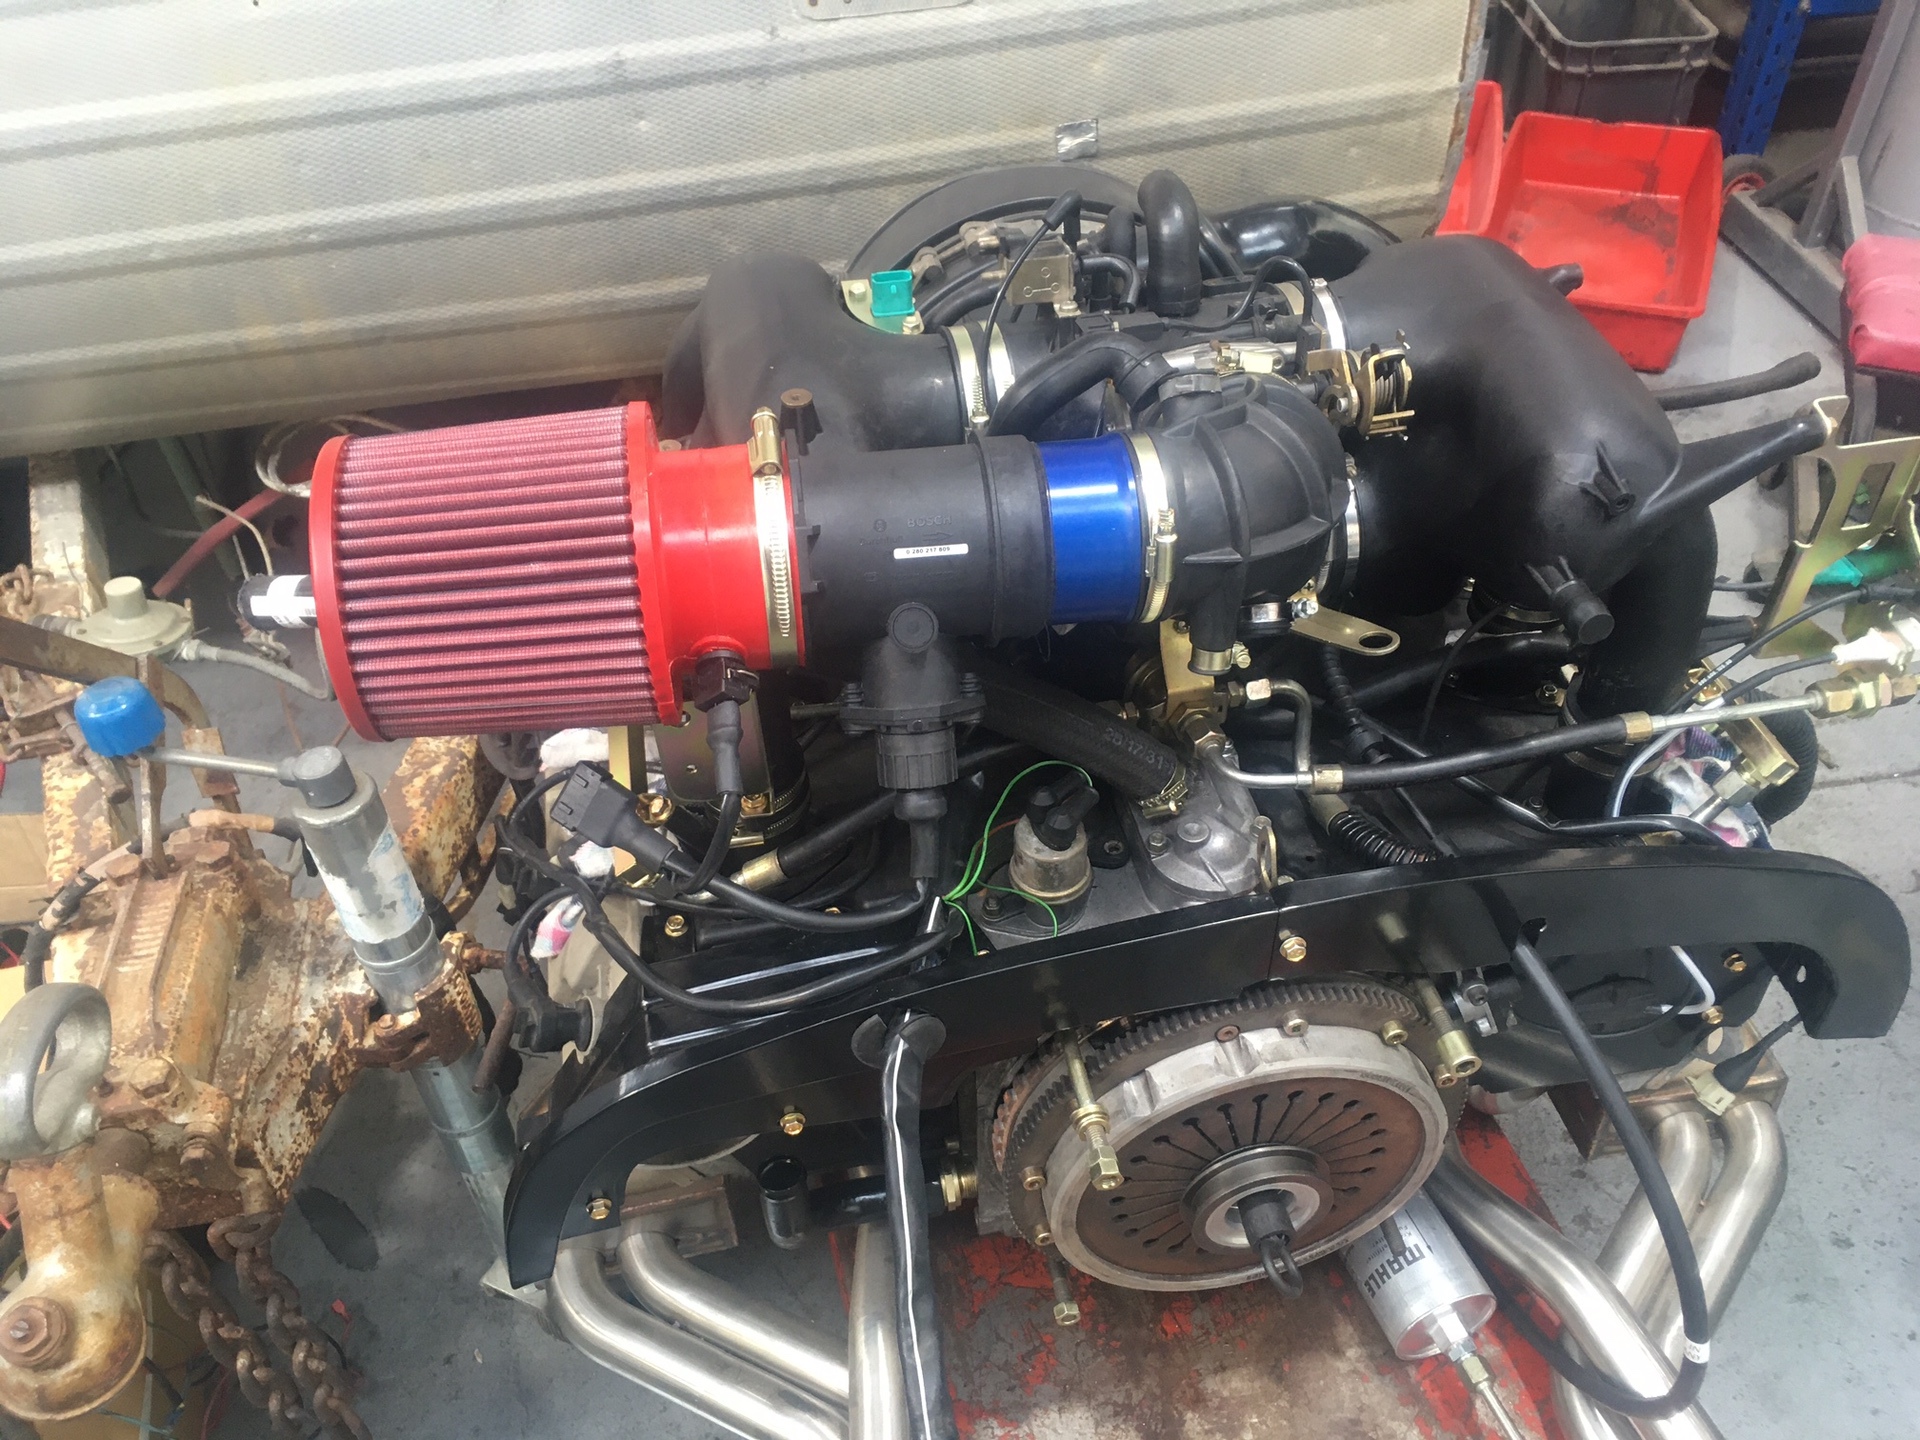 Rebuilt 964 3.6L 911 engine, the new beating heart of the 914/6 restomod